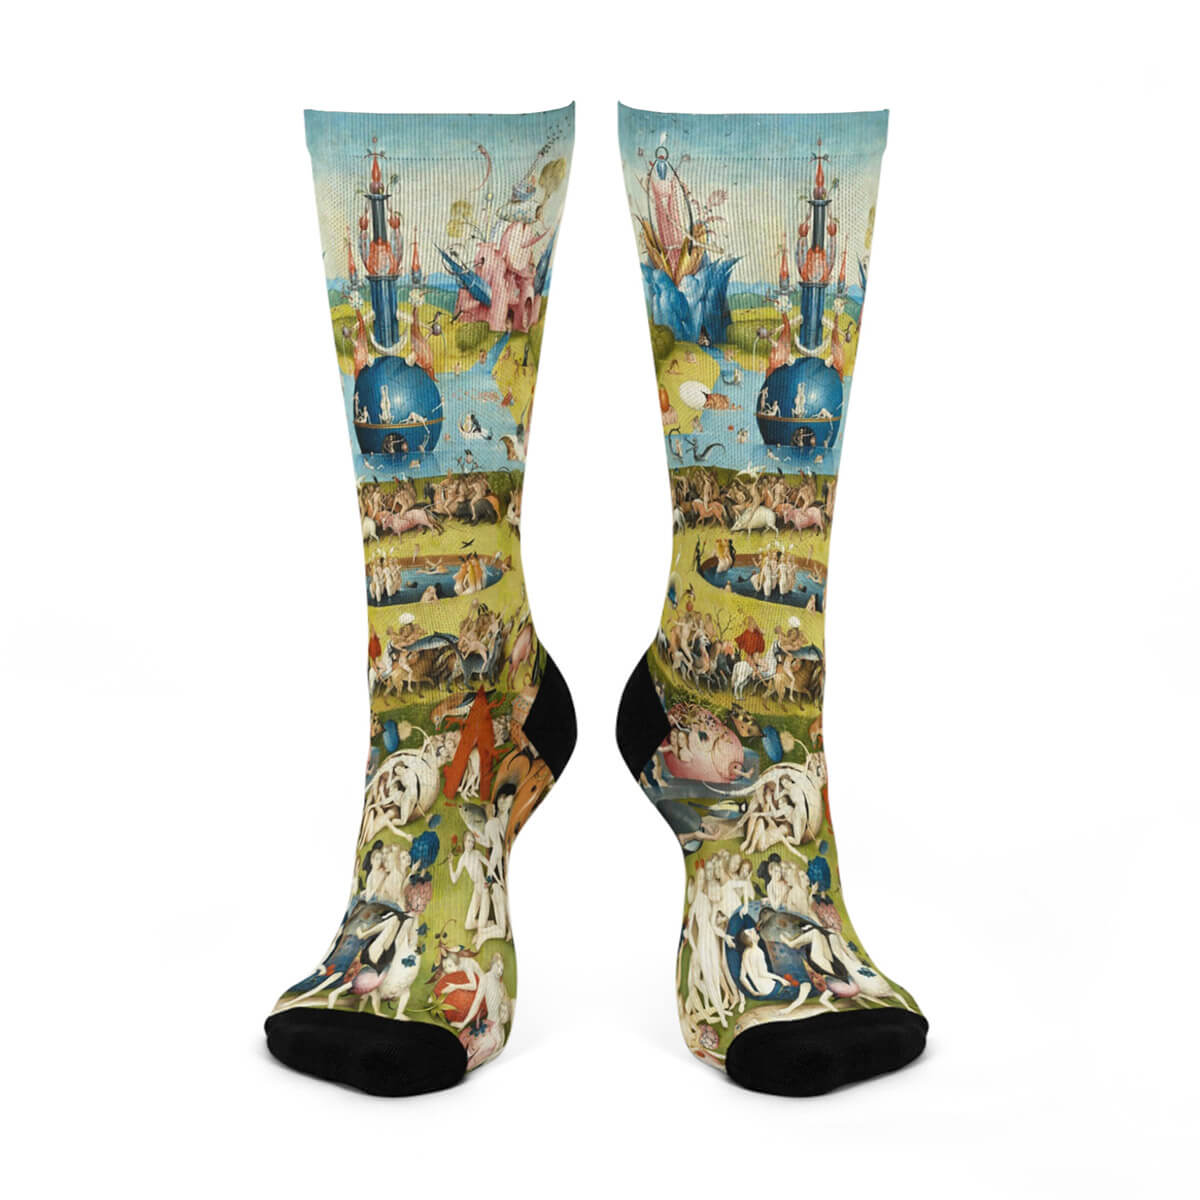 Hieronymus Bosch The Garden of Earthly Delights Socks